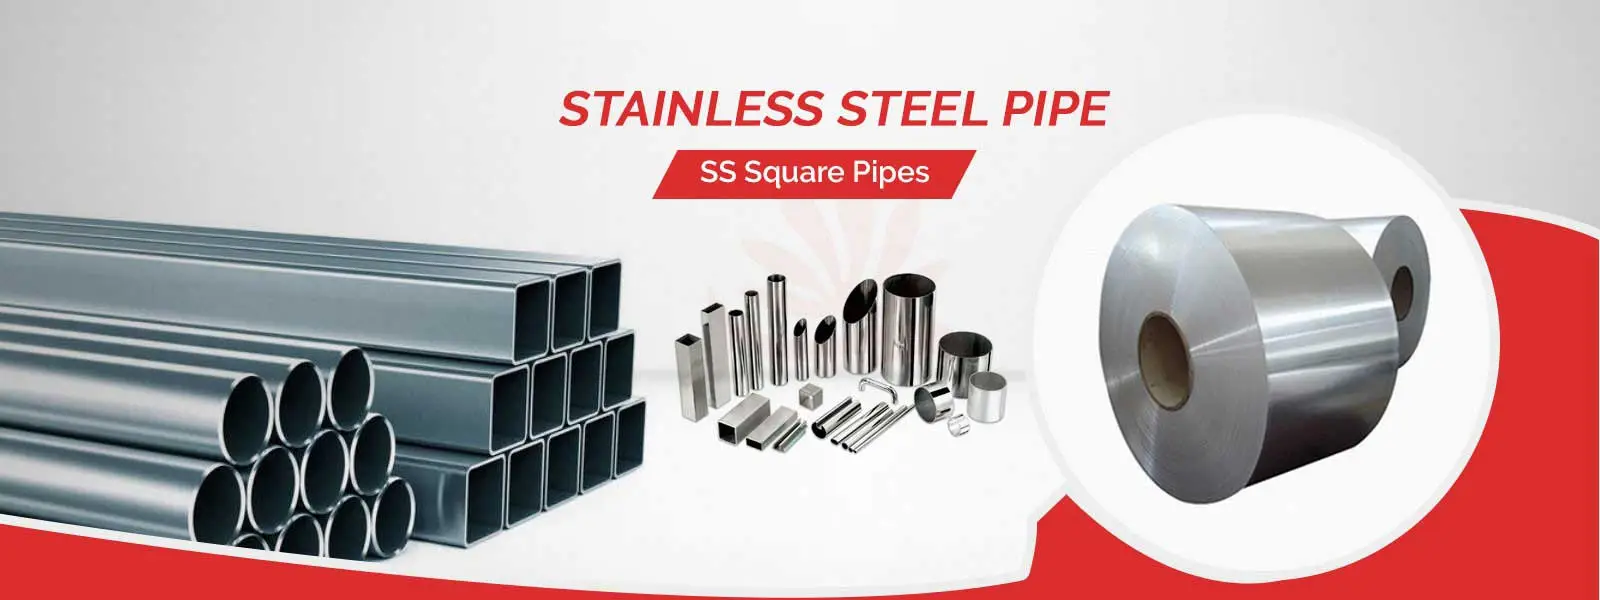 Stainless Steel Pipe Manufacturers in Himachal Pradesh